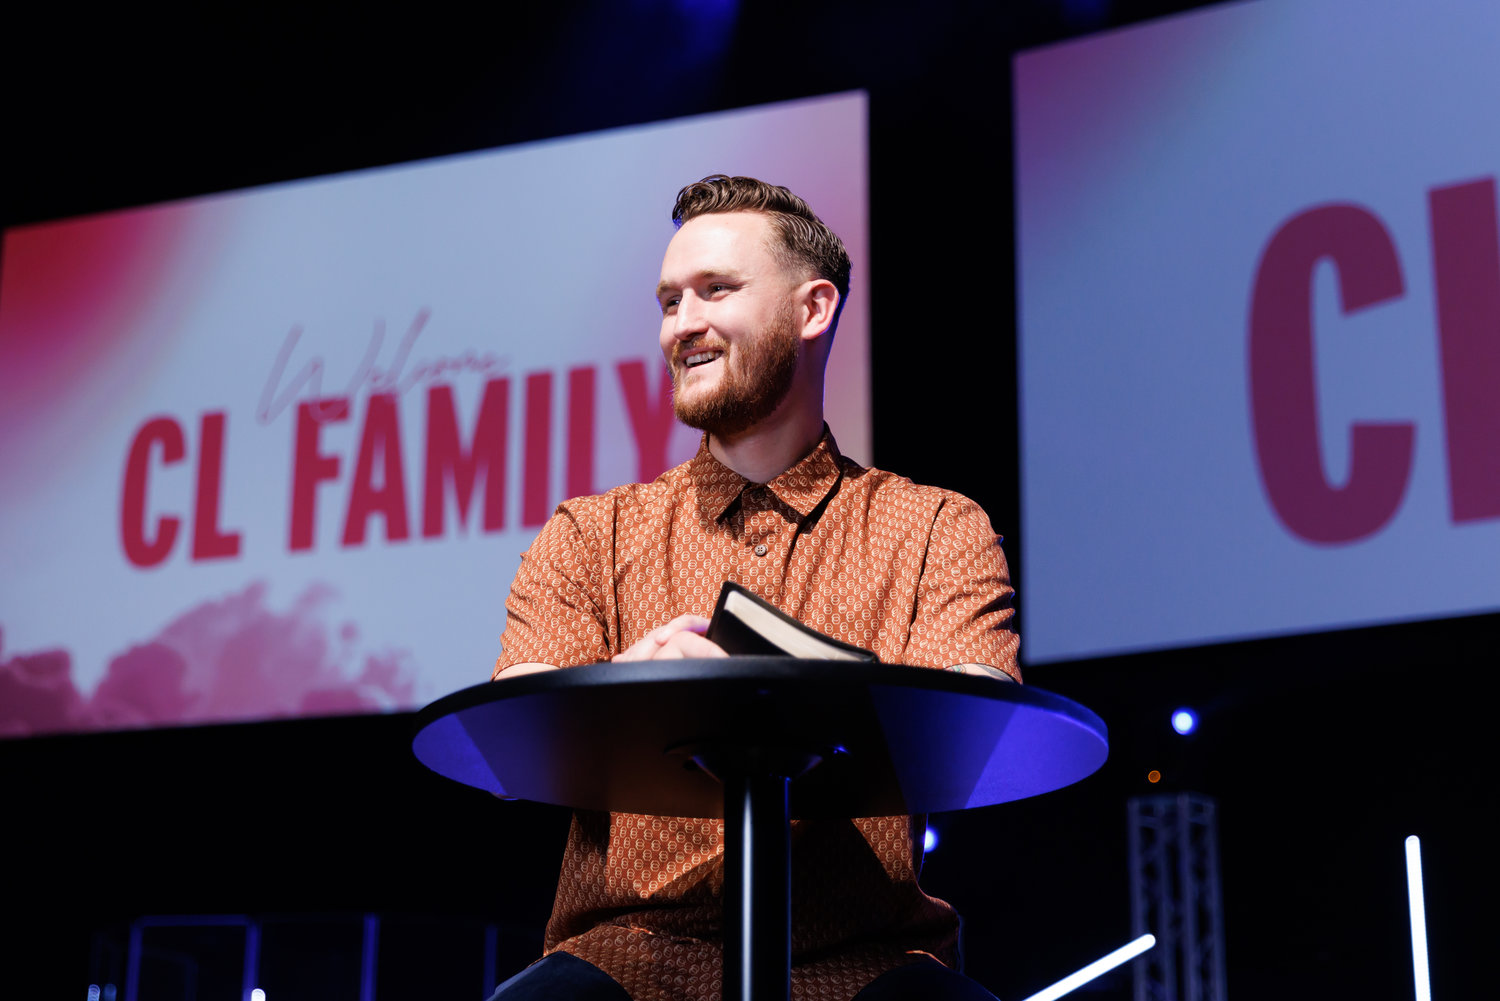 After seven years as missionaries in Mexico and Nicaragua, Cameron Brice and his wife, Micaela, returned to Fayetteville in 2020 to take over leadership of Covenant Love Church, which his father founded in 1991.